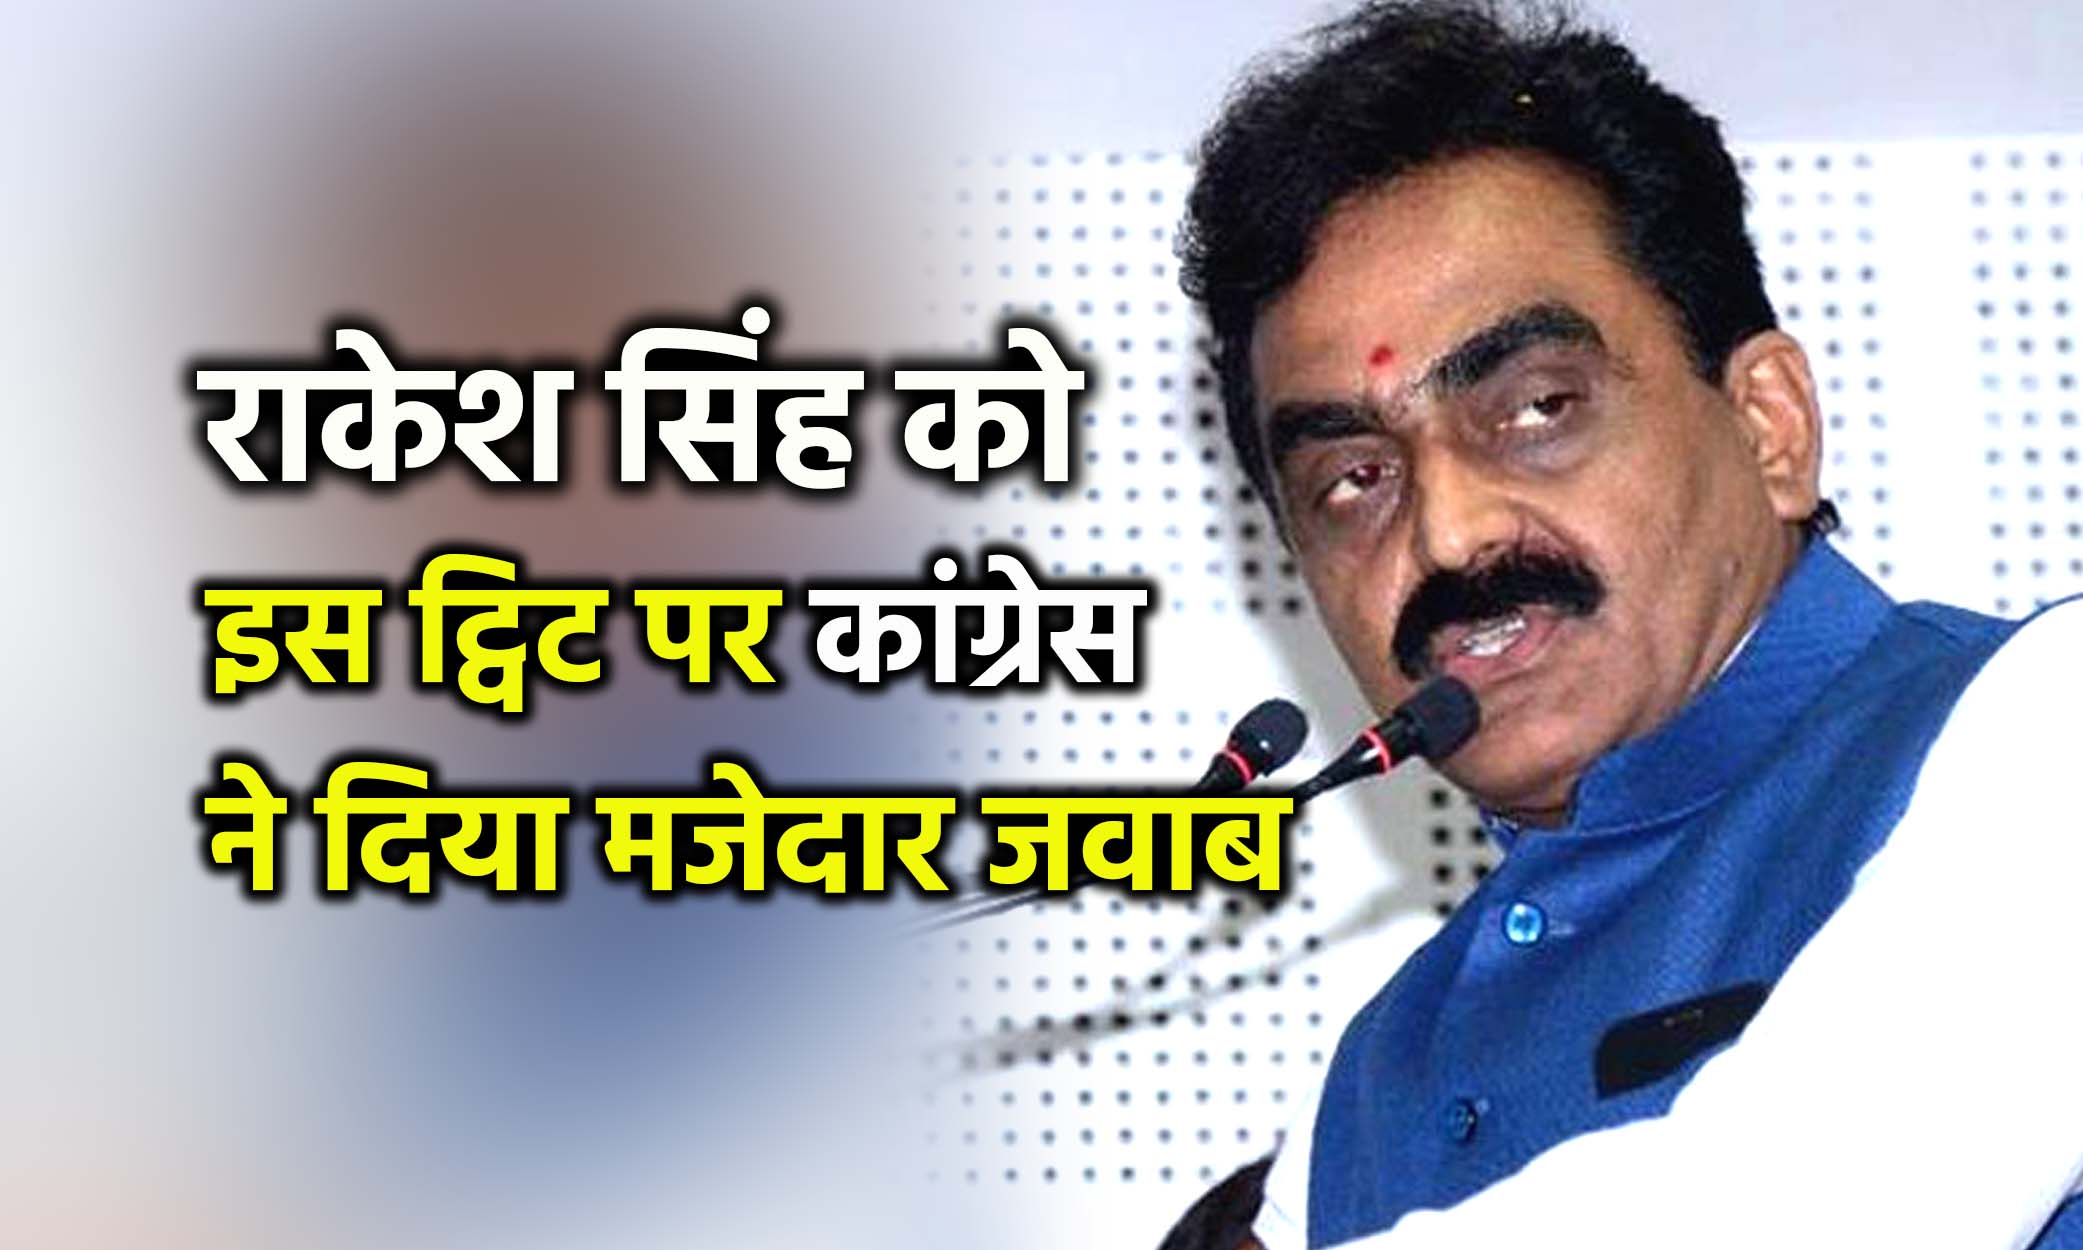 congress-has-given-the-funny-answer-to-this-tweet-by-bjp-state-president-rakesh-singh